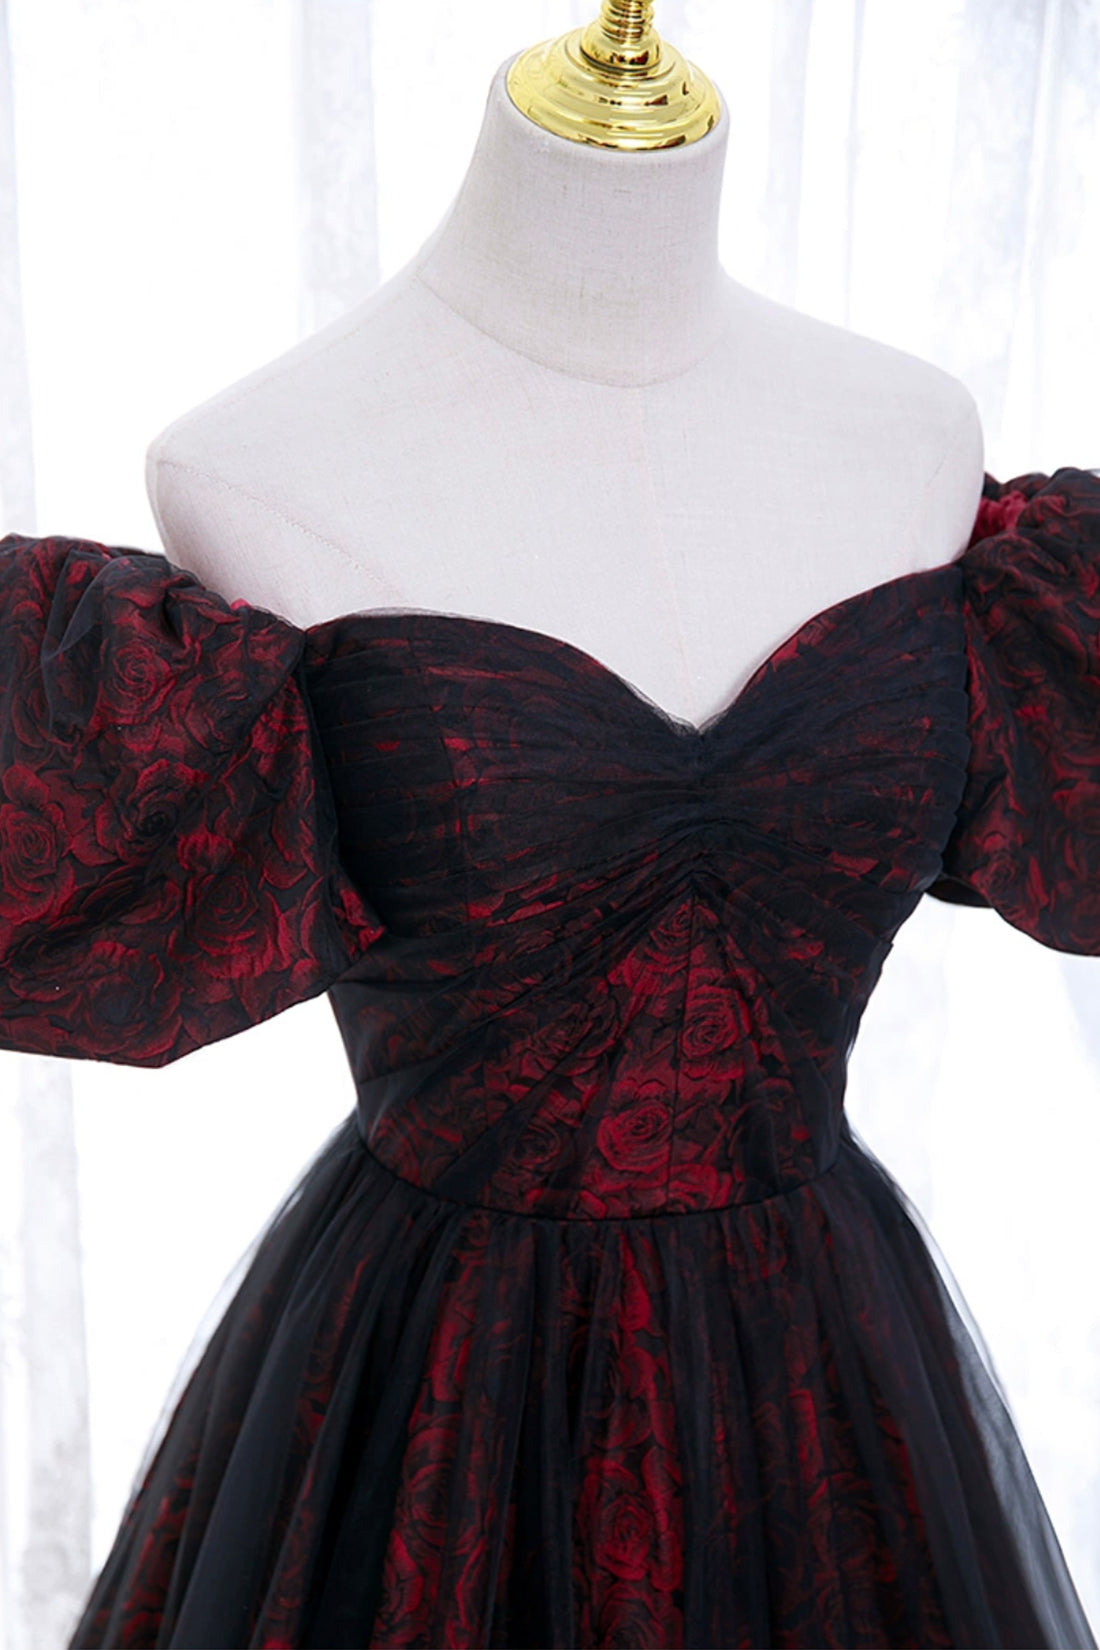 Burgundy Floral Pattern and Black Tulle Long Off Shoulder Prom Dress with Short Sleeves